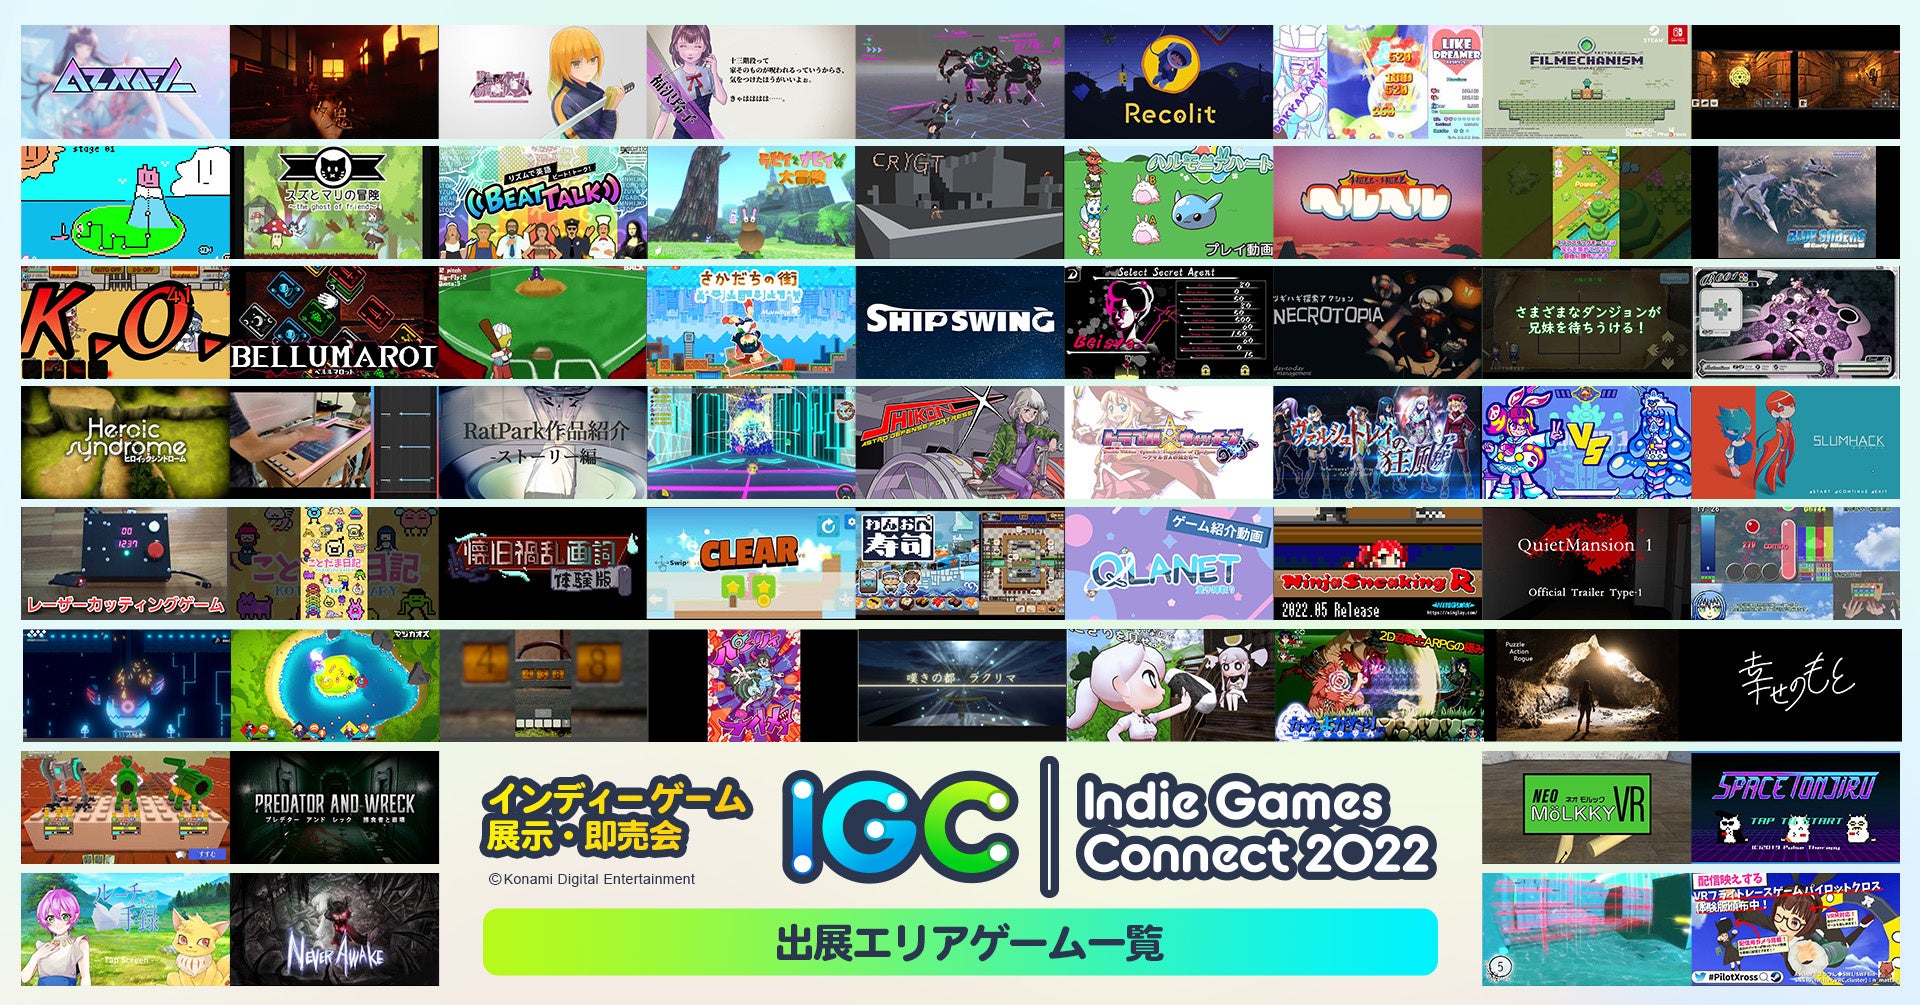 「Indie Games Connect 2022」 出展者決定！　総勢60サークルが生み出す、まだ見ぬ名作たちが銀座に集結！